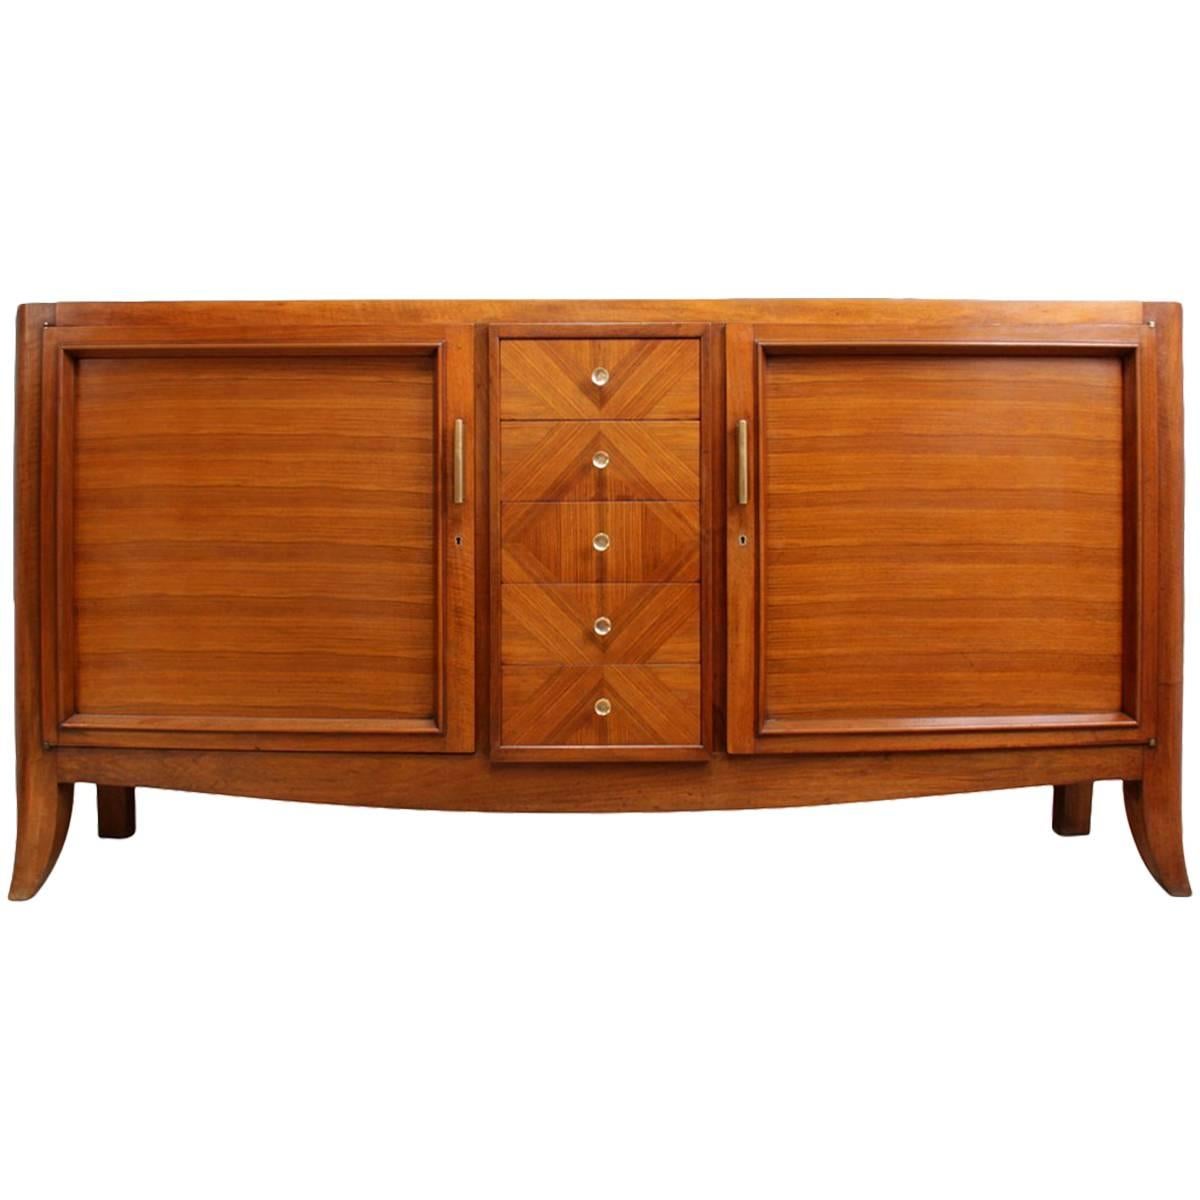 Art Deco Rosewood Sideboard, French, circa 1930